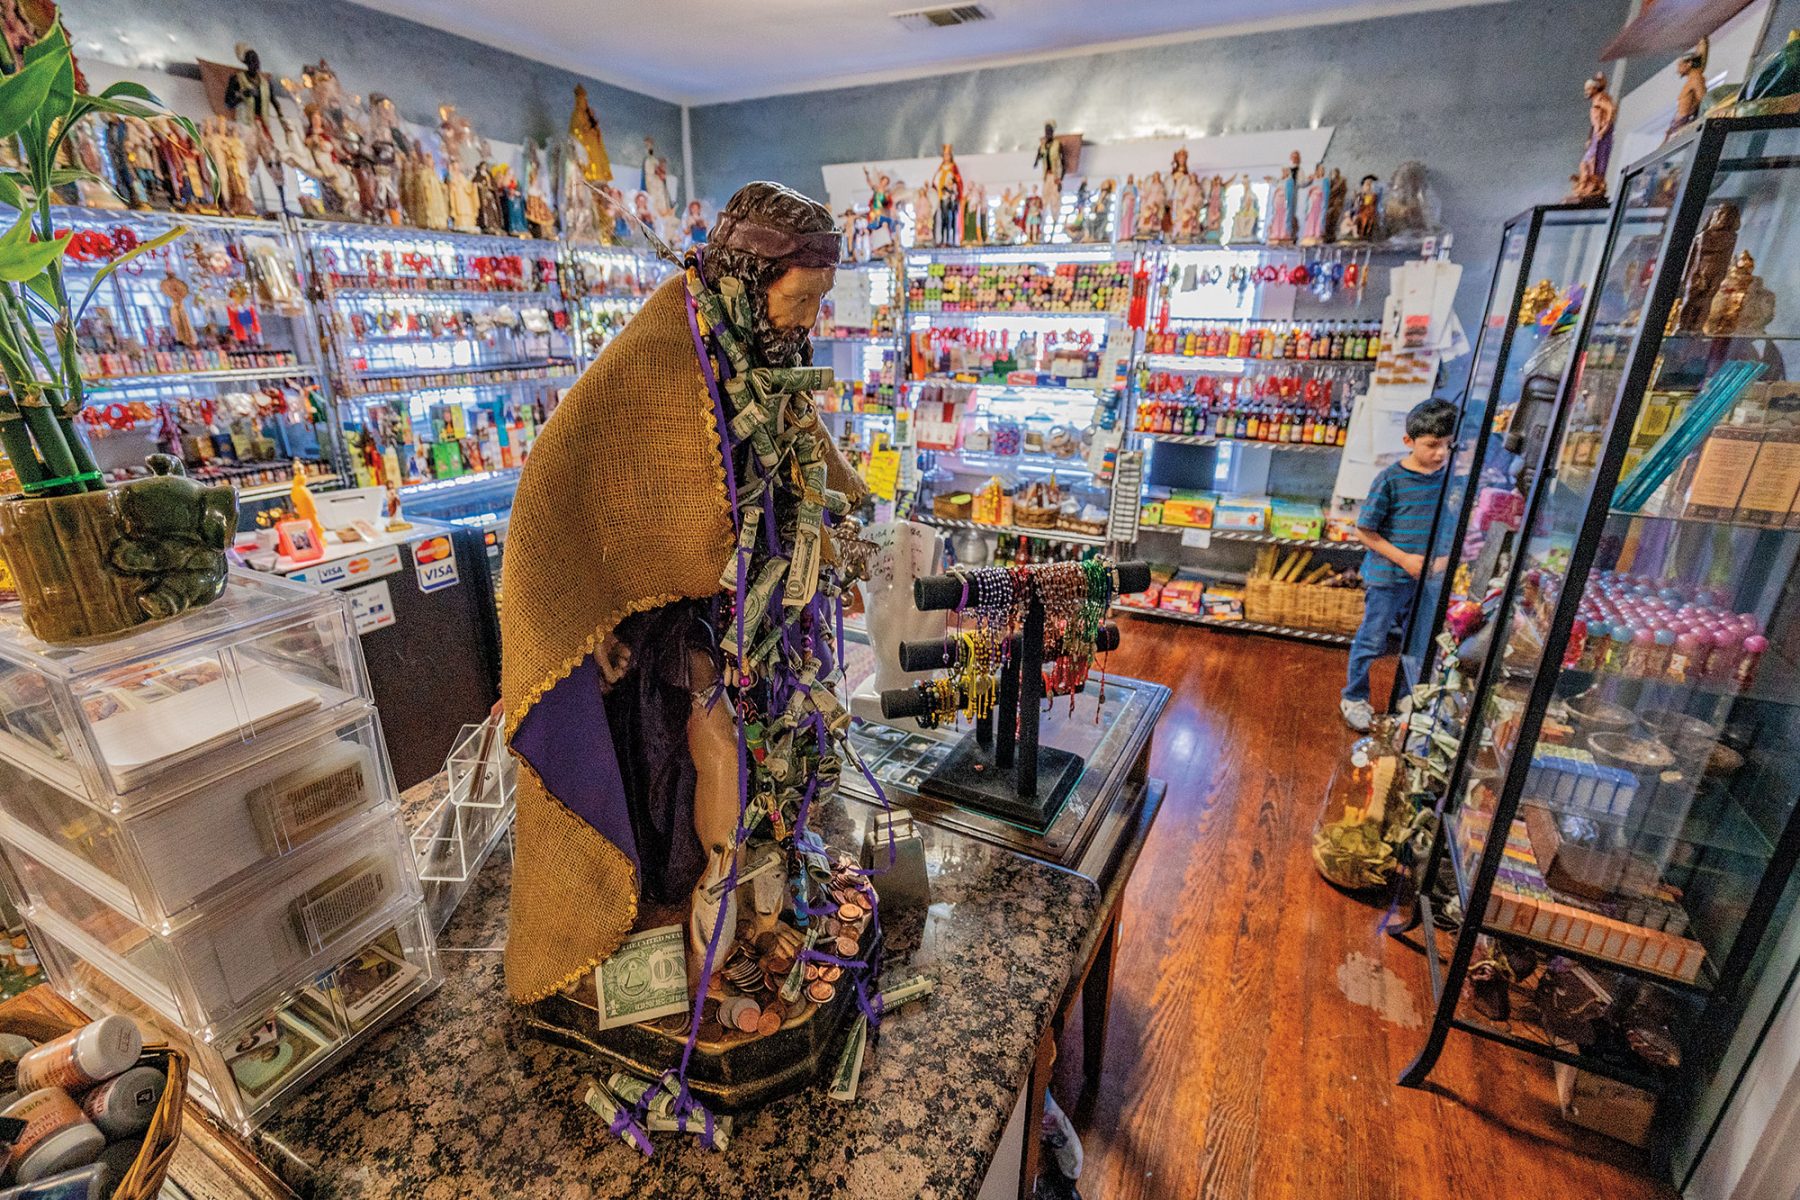 on All Manner of Higher Powers, This San Antonio Shop Has Just the Thing for Your Earthly Problems